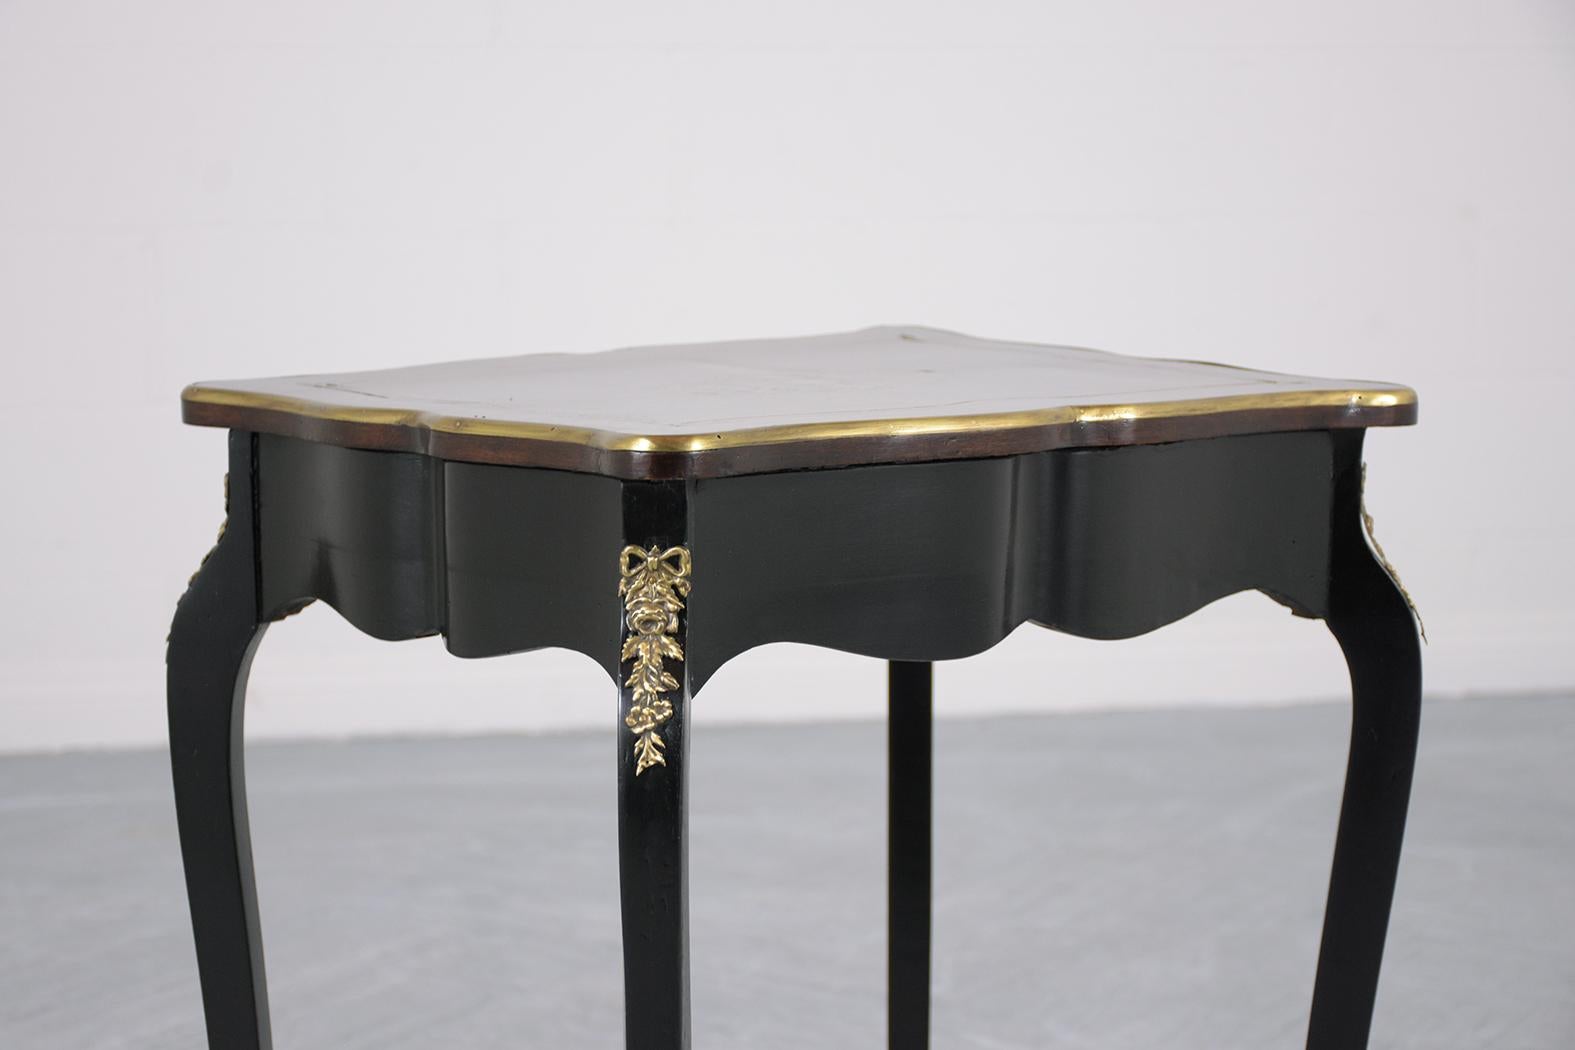 Mahogany Elegant French Napoleon III Ebonized Marquetry Side Table with Brass Accents For Sale